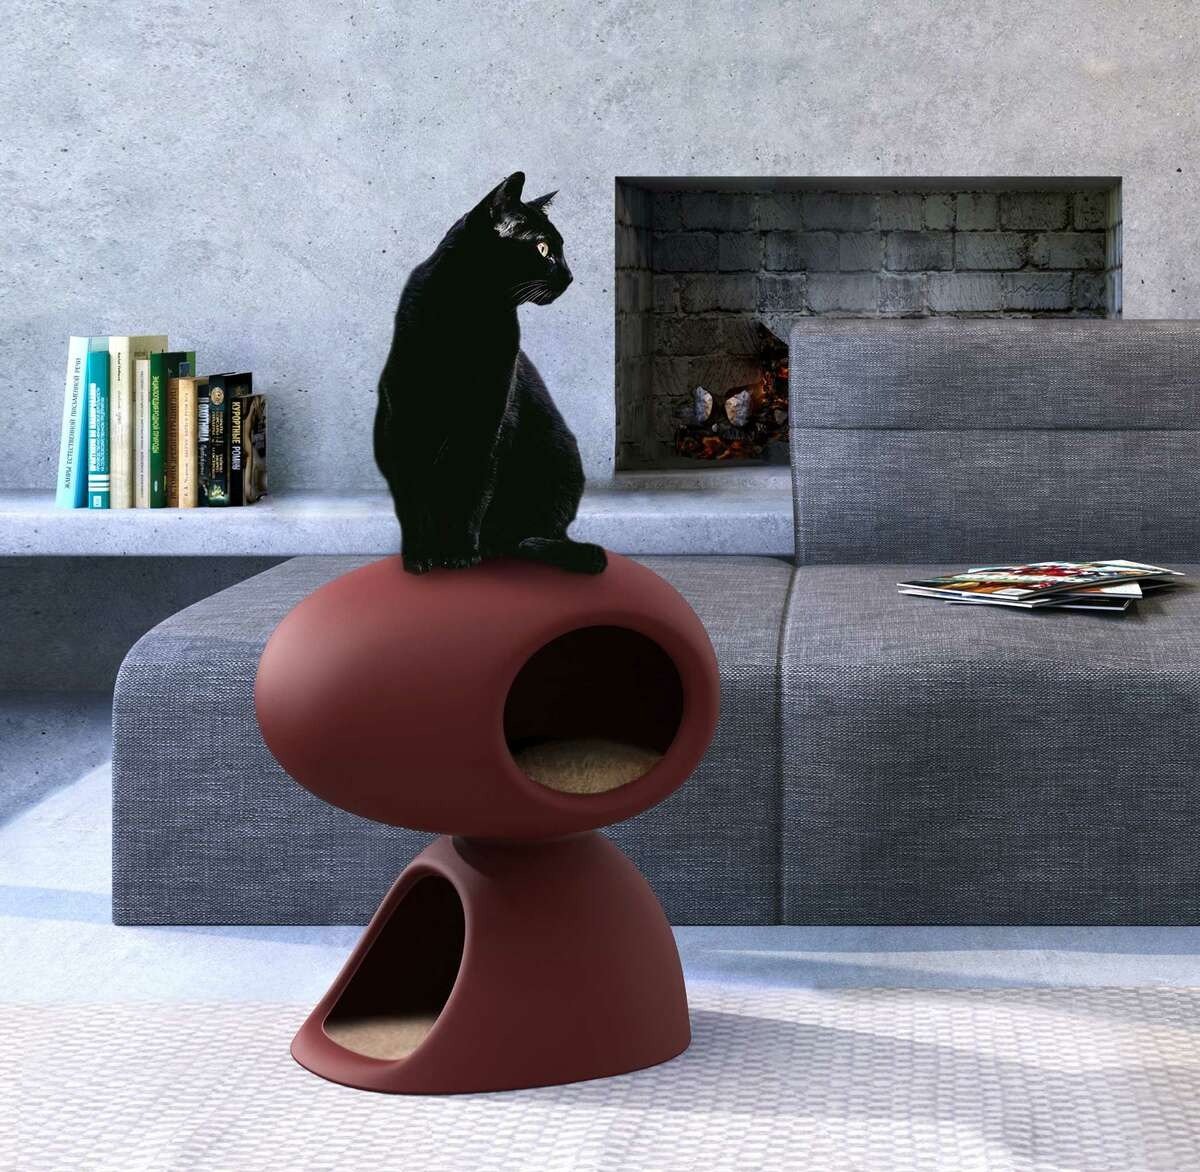 Cat Cave is a project of Stefano Giovannoni, which is a joint venture of Qeeboo and United Pets, a specialized company dealing with pets.